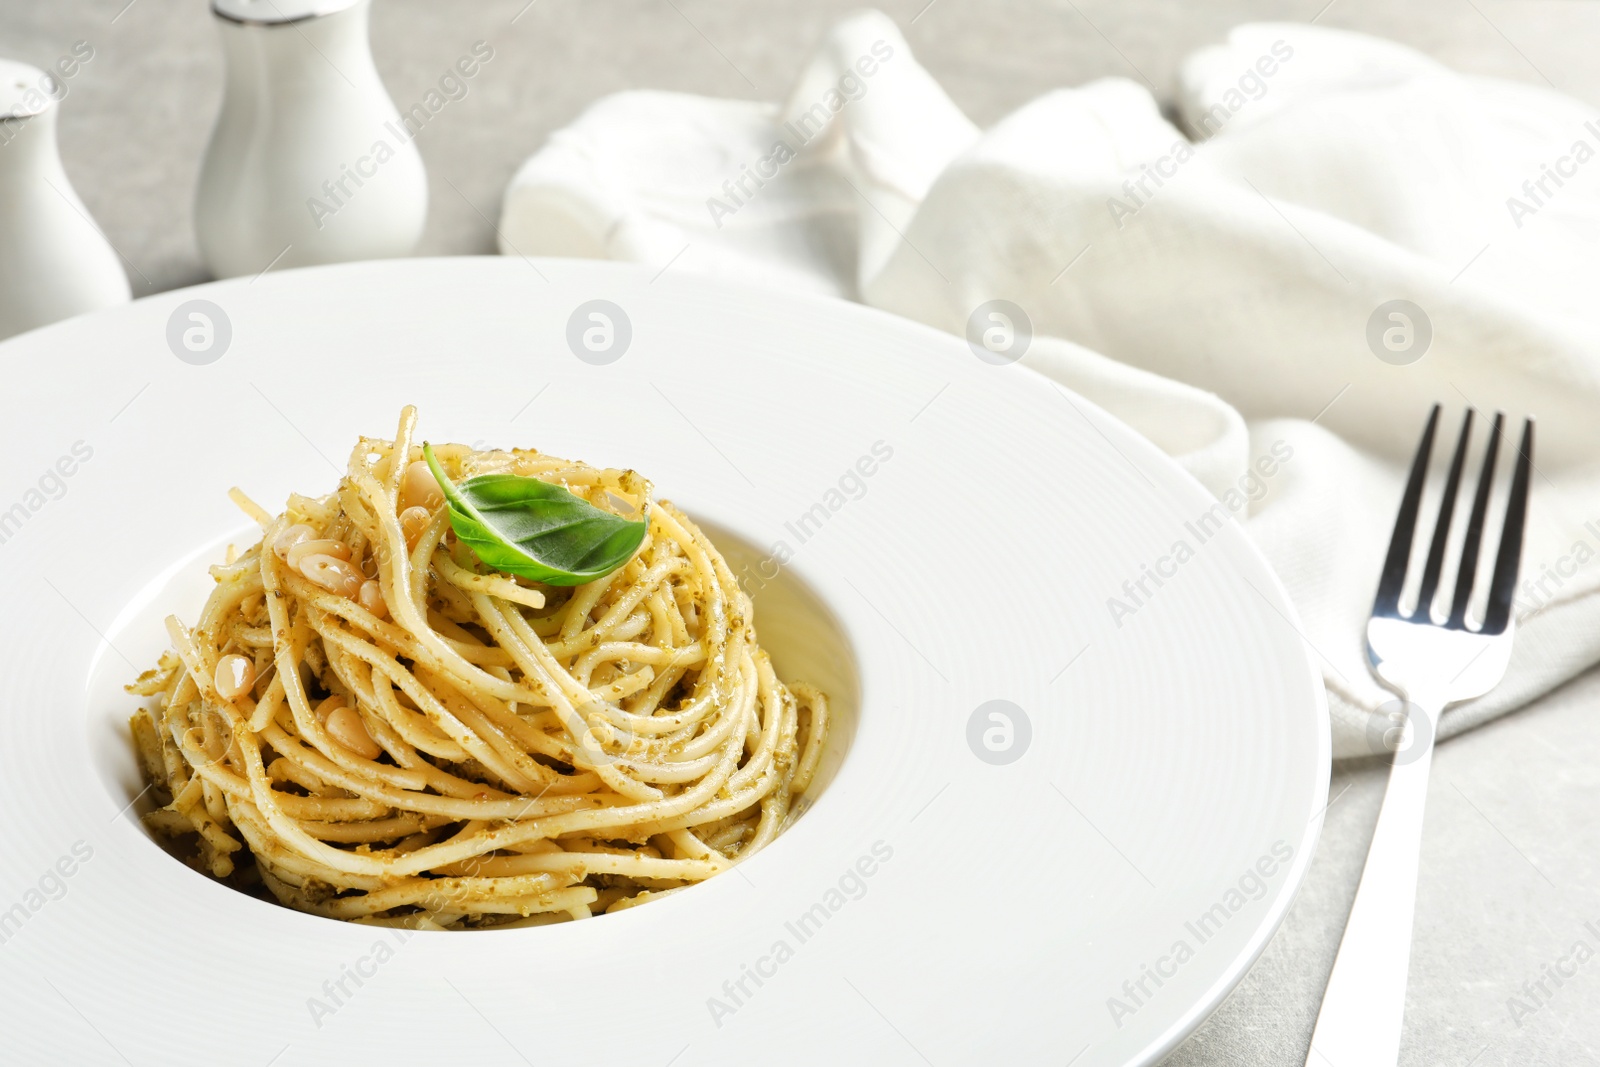 Photo of Plate of delicious basil pesto pasta served for dinner on table, closeup